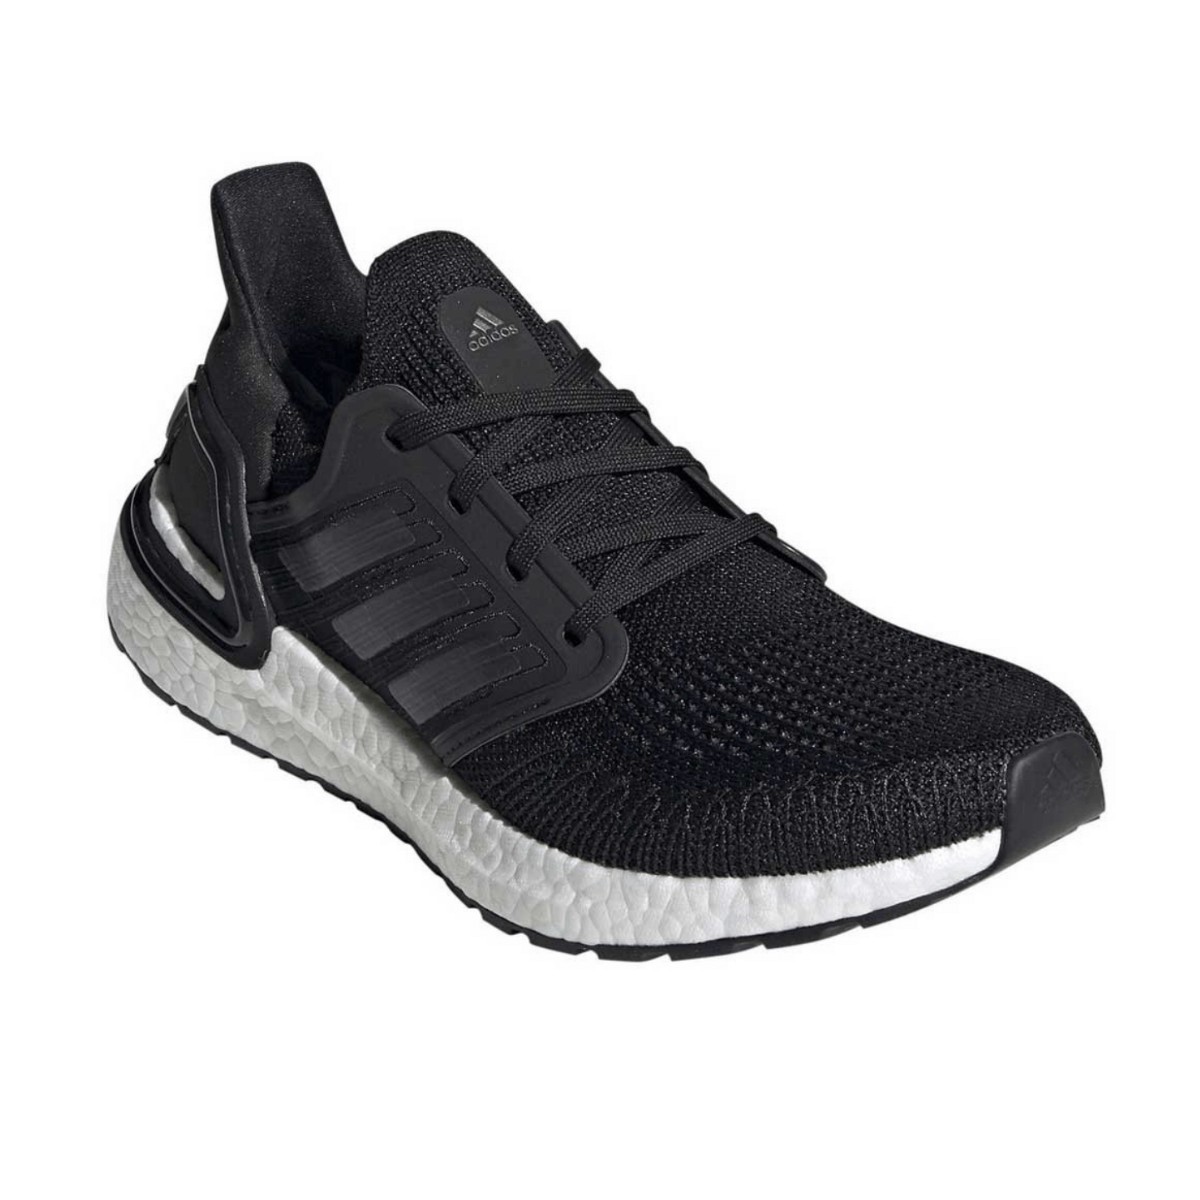 adidas ultra boost women black and white